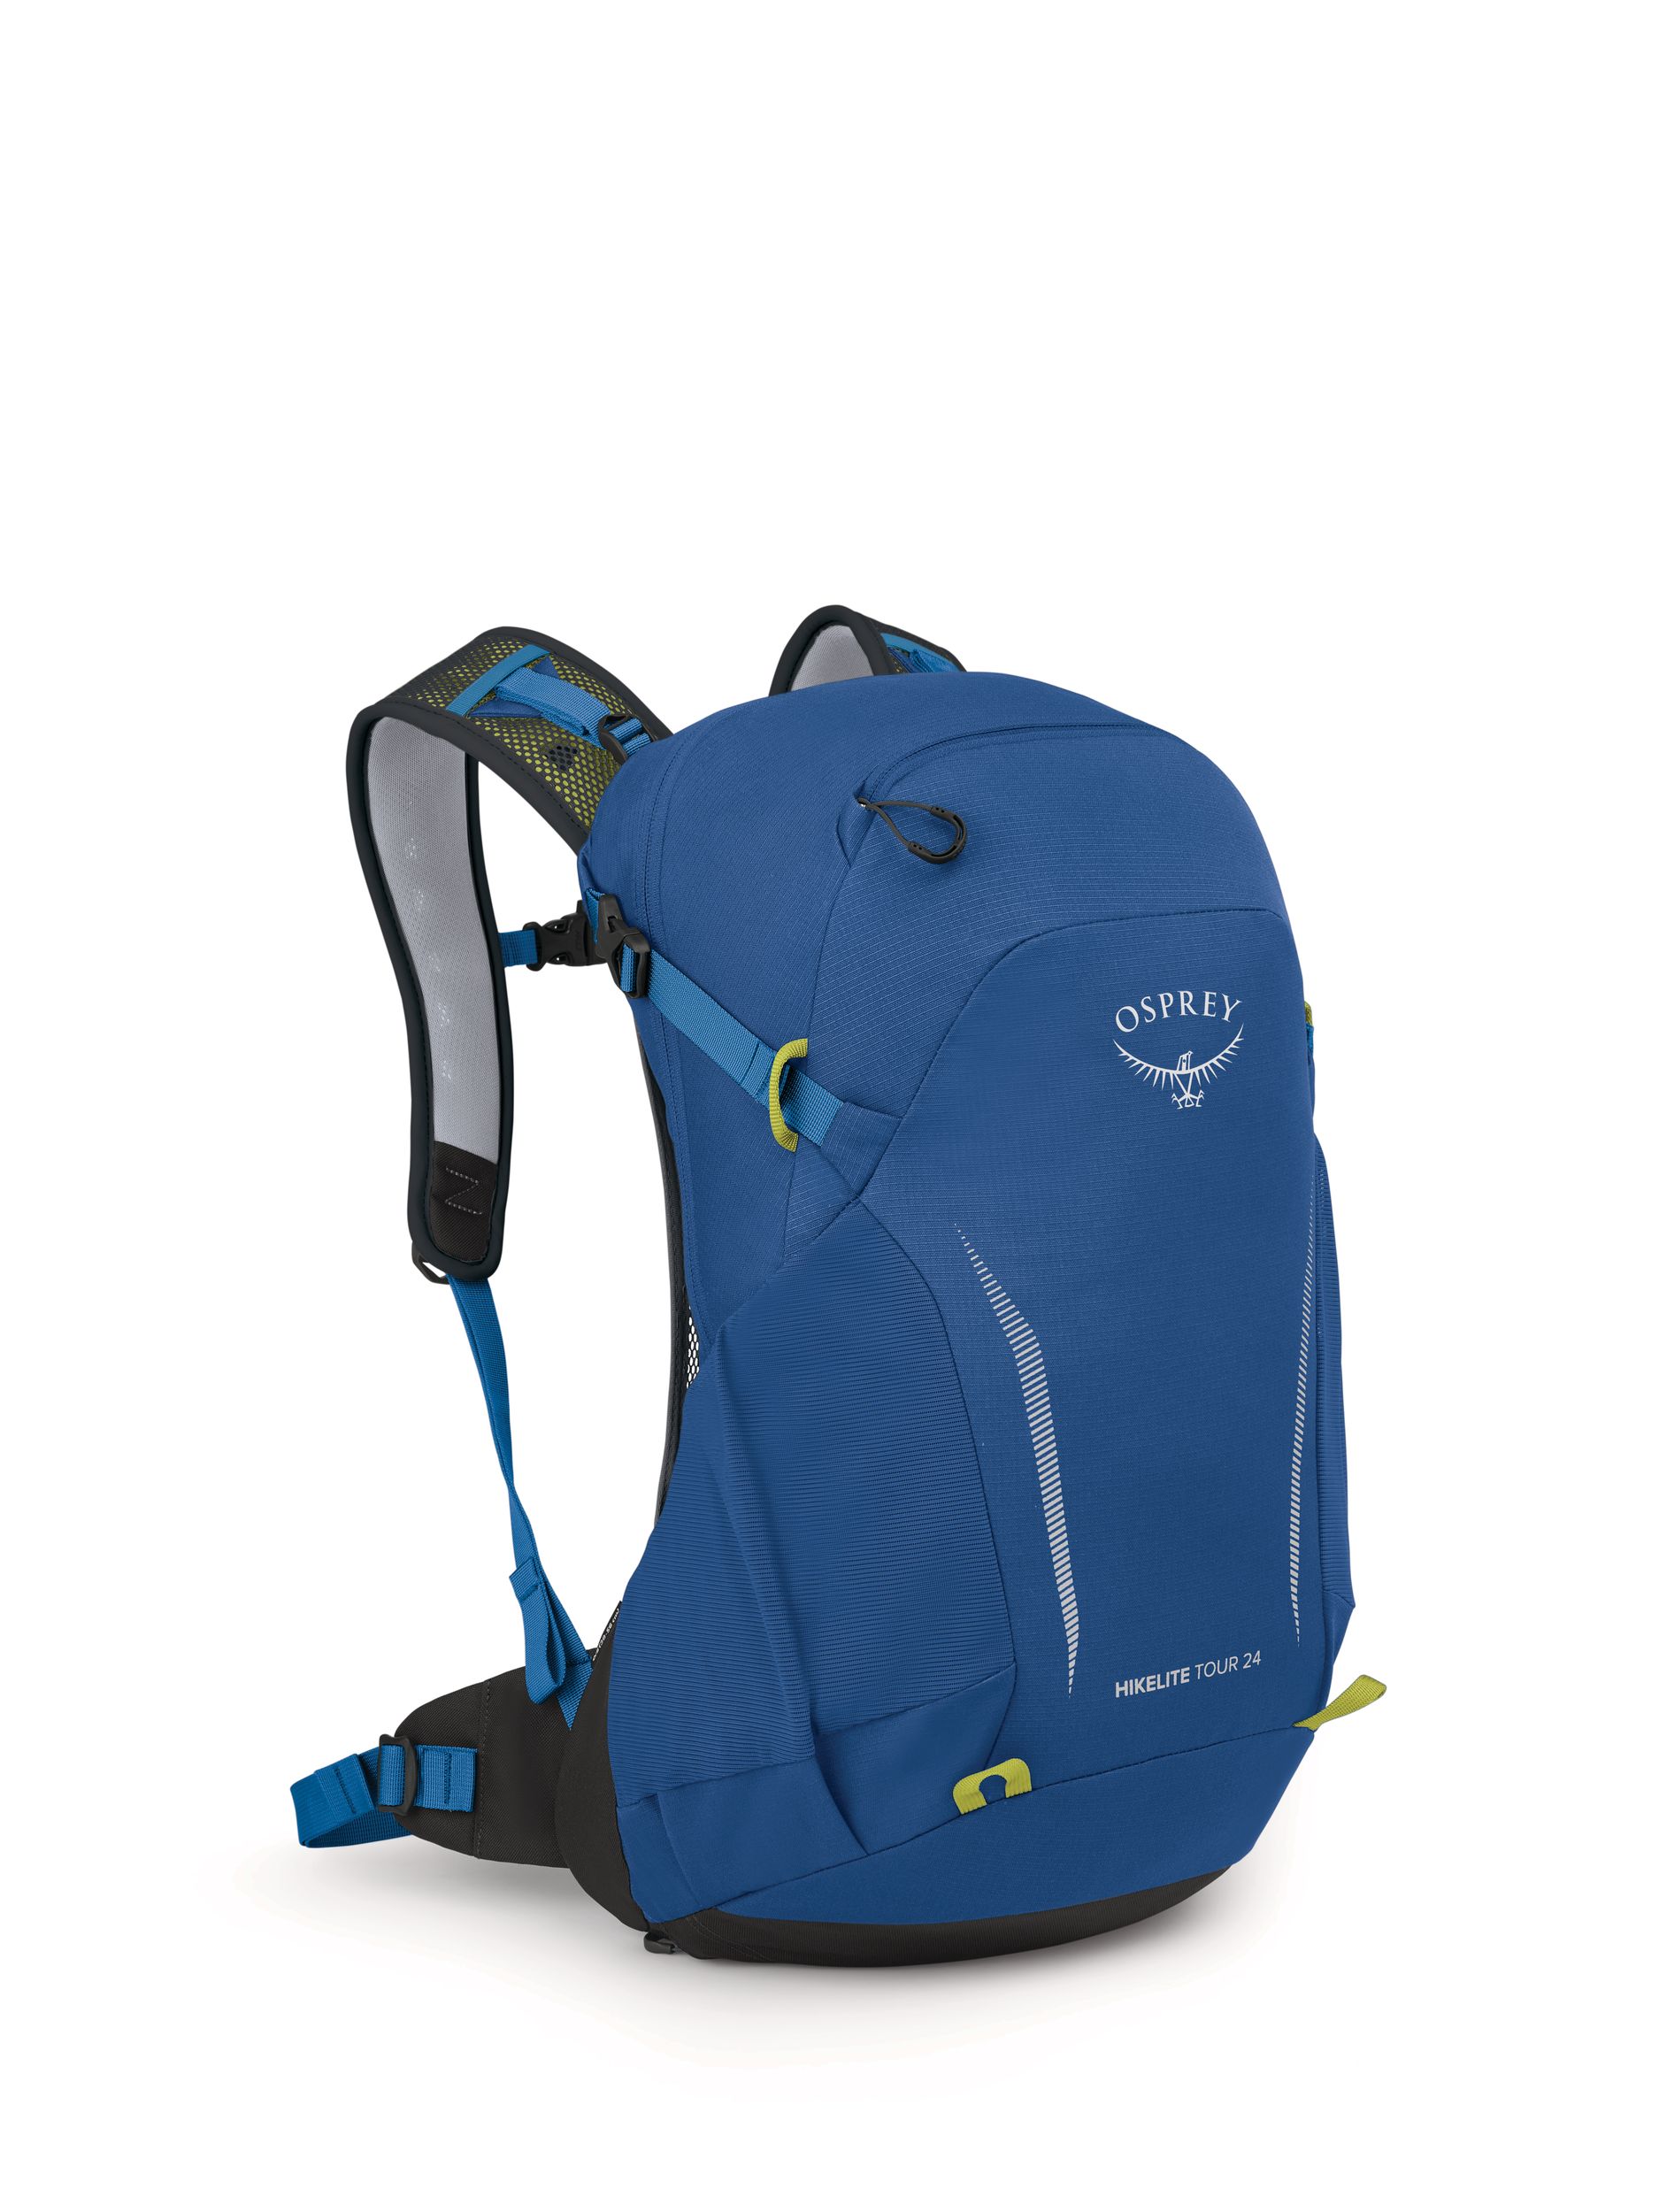 Image of Osprey Hikelite Tour 24 Day Pack